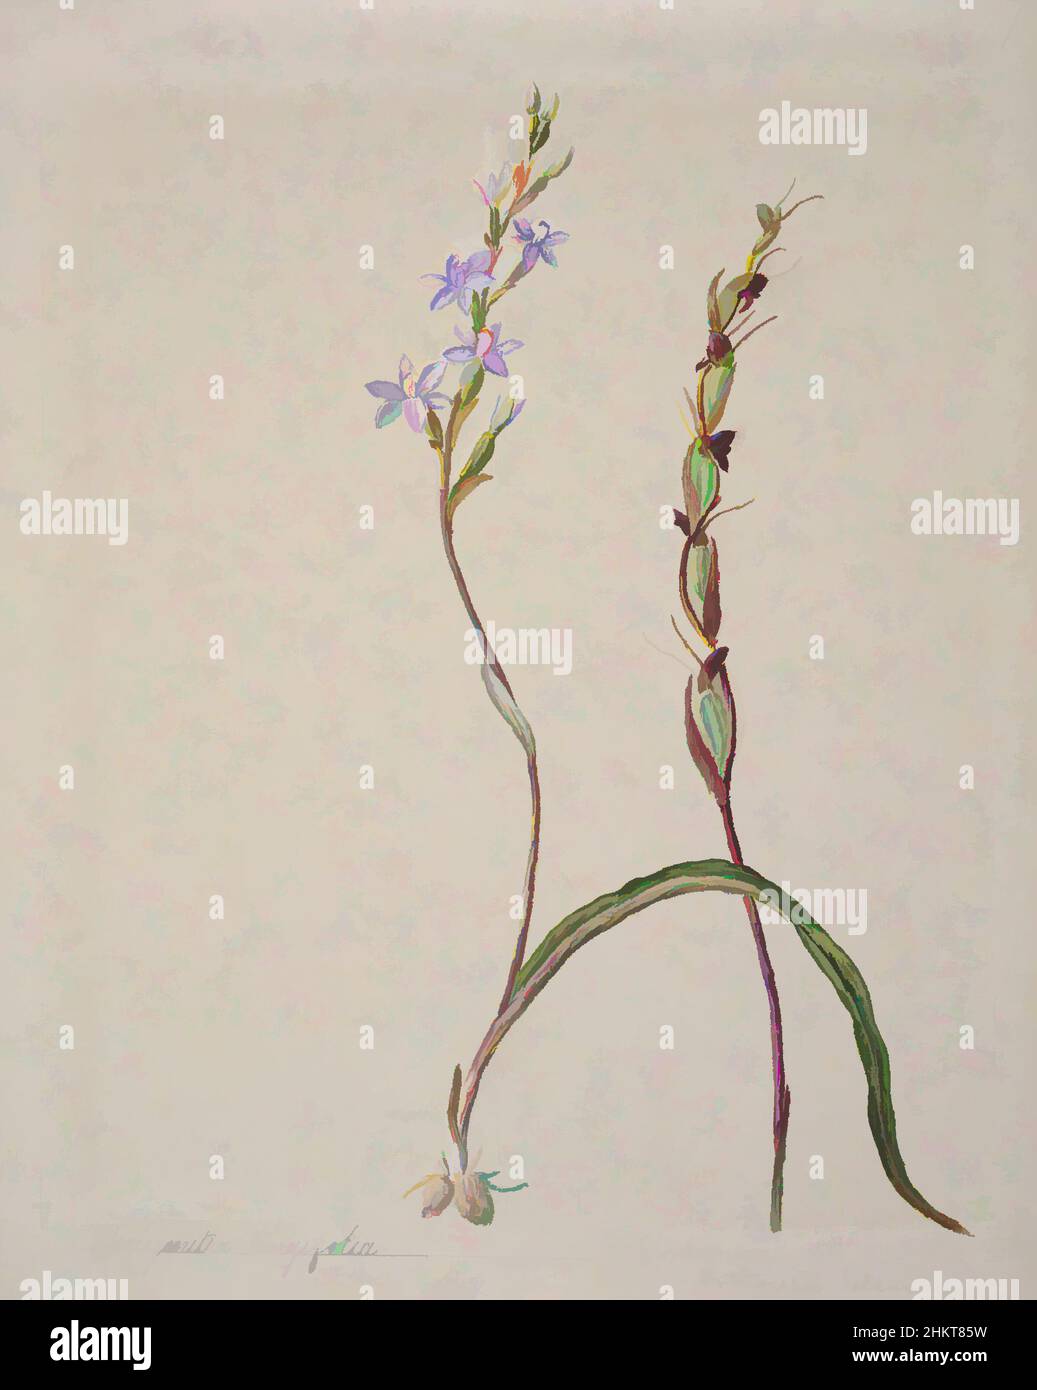 Art inspired by [Thelymitra longifolia], Sarah Featon, circa 1885, New Zealand, In 1889 Sarah Featon and her husband Edward Featon published The Art Album of New Zealand Flora, in which they sought to dispute the ‘mistaken notion that New Zealand is peculiarly destitute of native, Classic works modernized by Artotop with a splash of modernity. Shapes, color and value, eye-catching visual impact on art. Emotions through freedom of artworks in a contemporary way. A timeless message pursuing a wildly creative new direction. Artists turning to the digital medium and creating the Artotop NFT Stock Photo